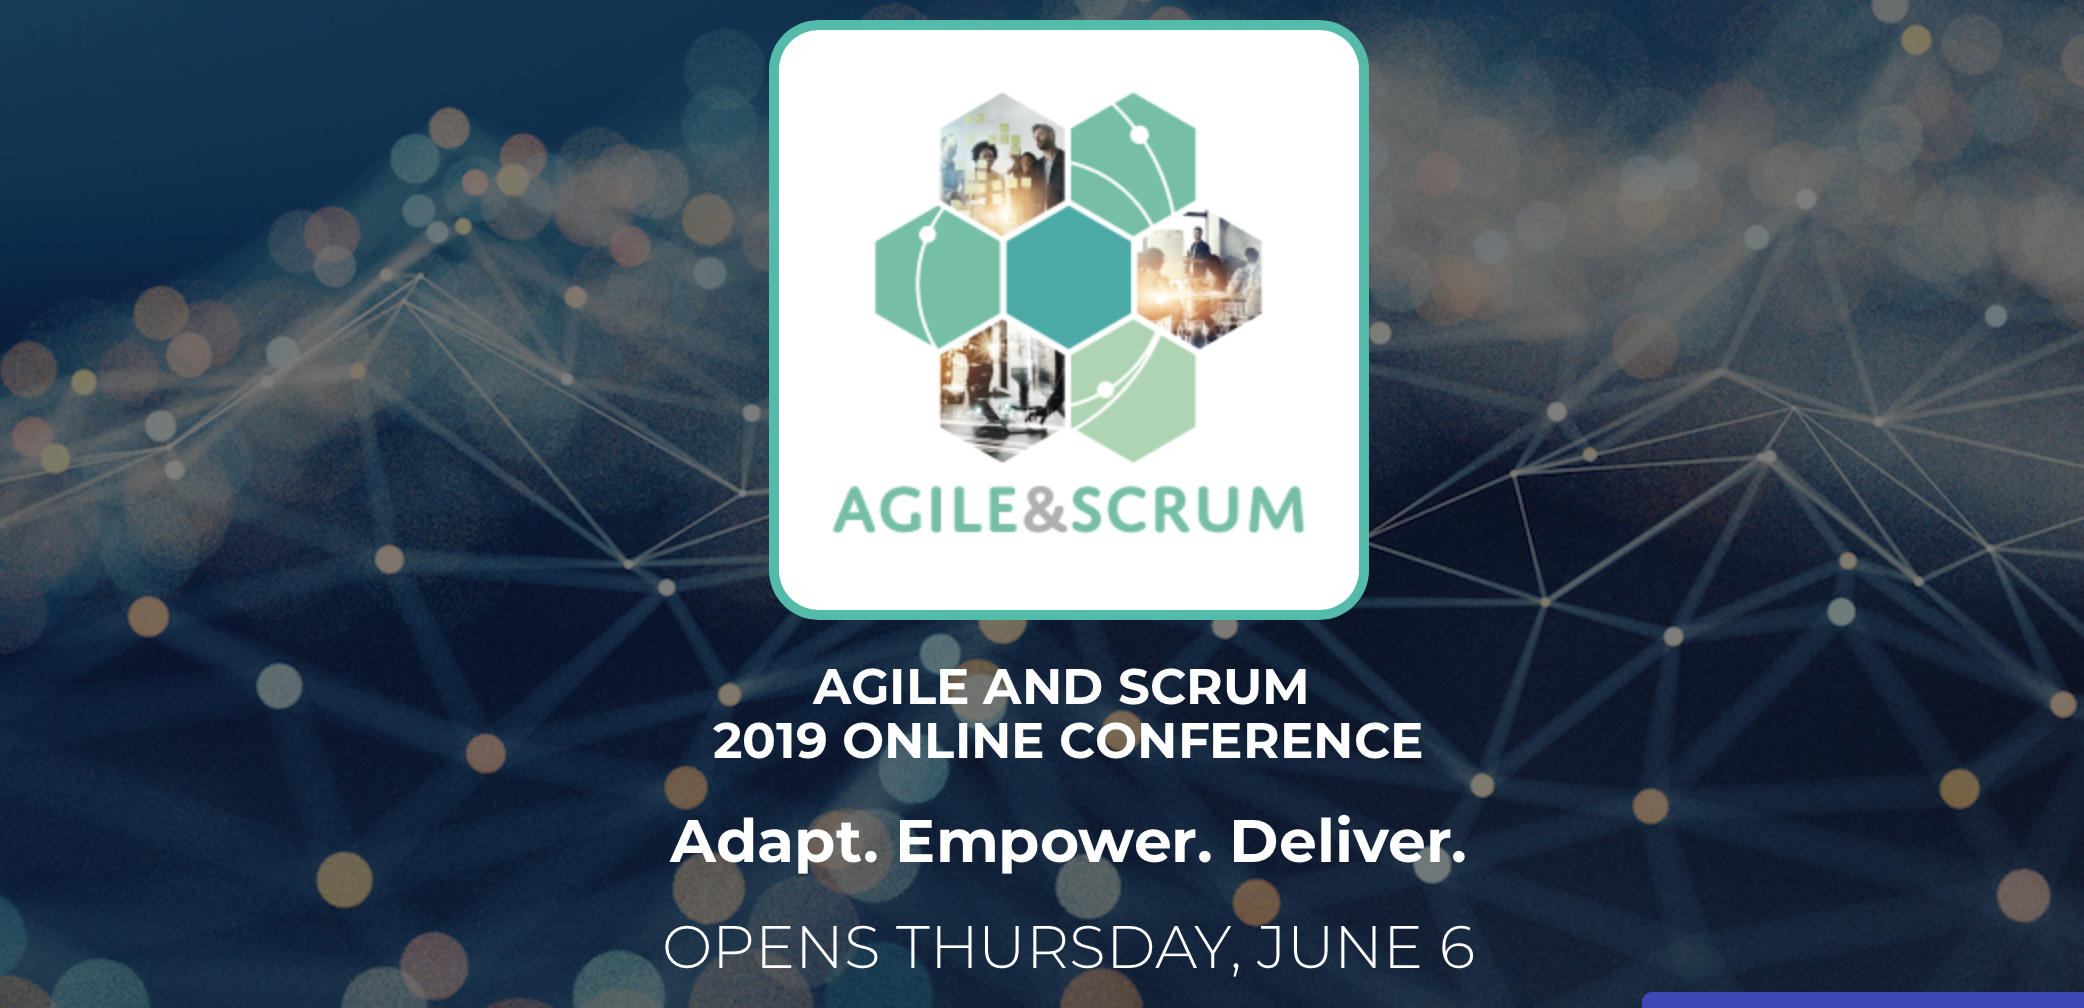 IIL Agile and Scrum 2019 Online Conference